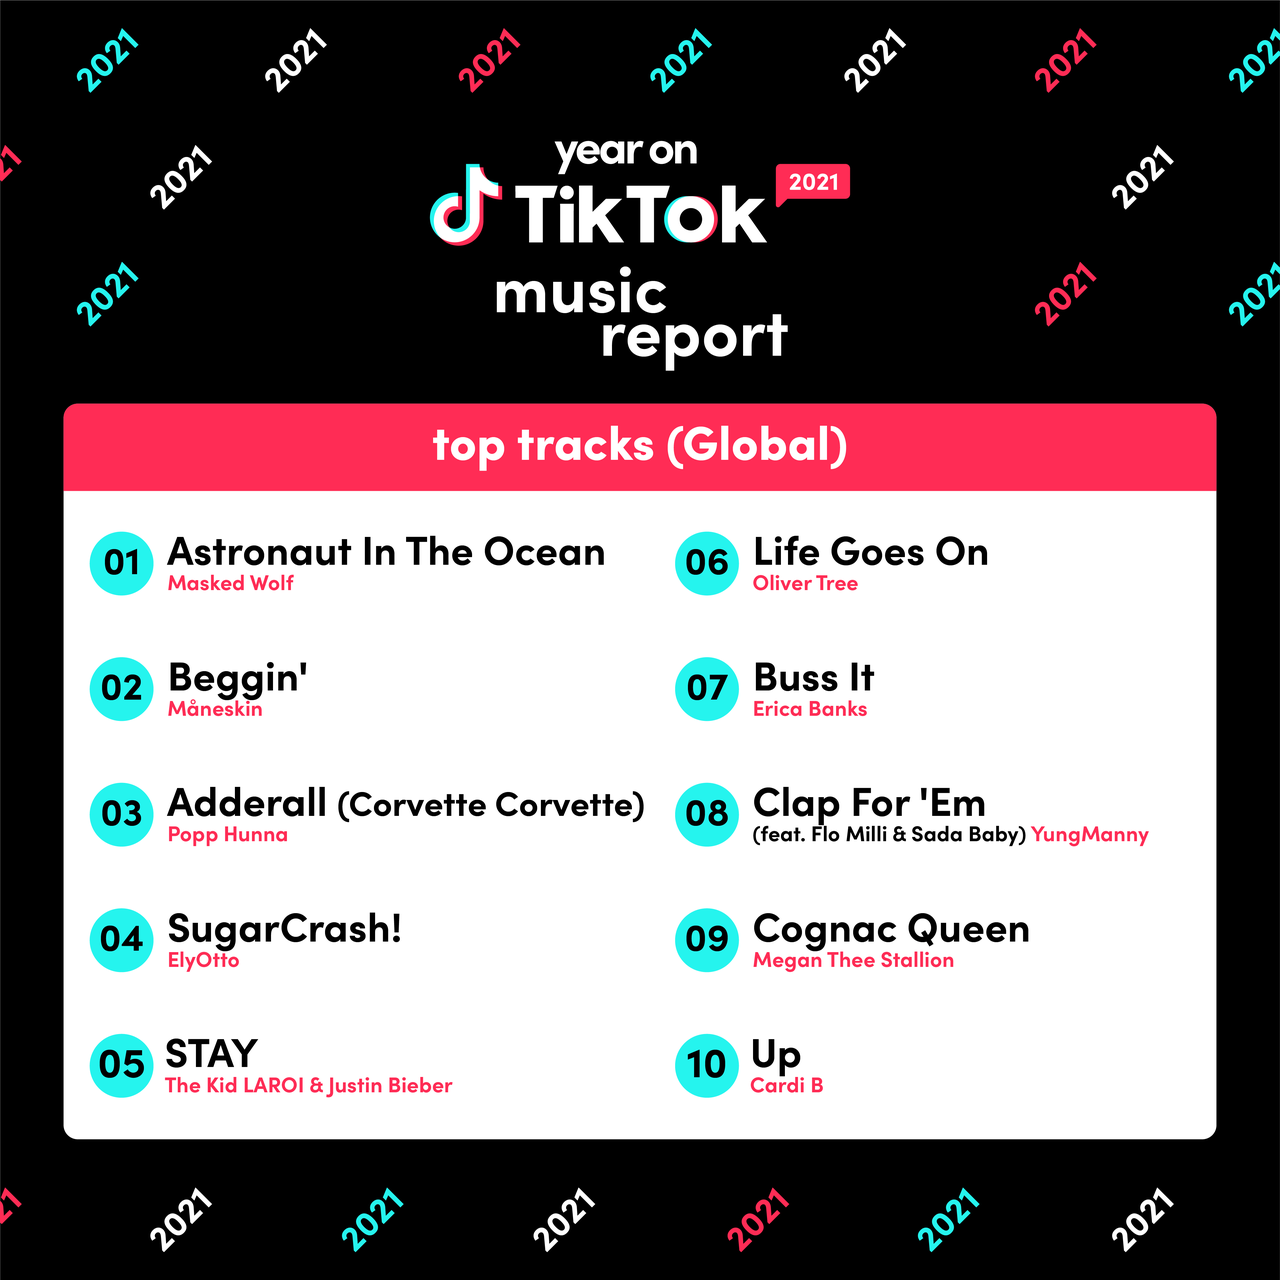 QUEEN OF DANCE Official Tiktok Music - List of songs and albums by QUEEN OF  DANCE